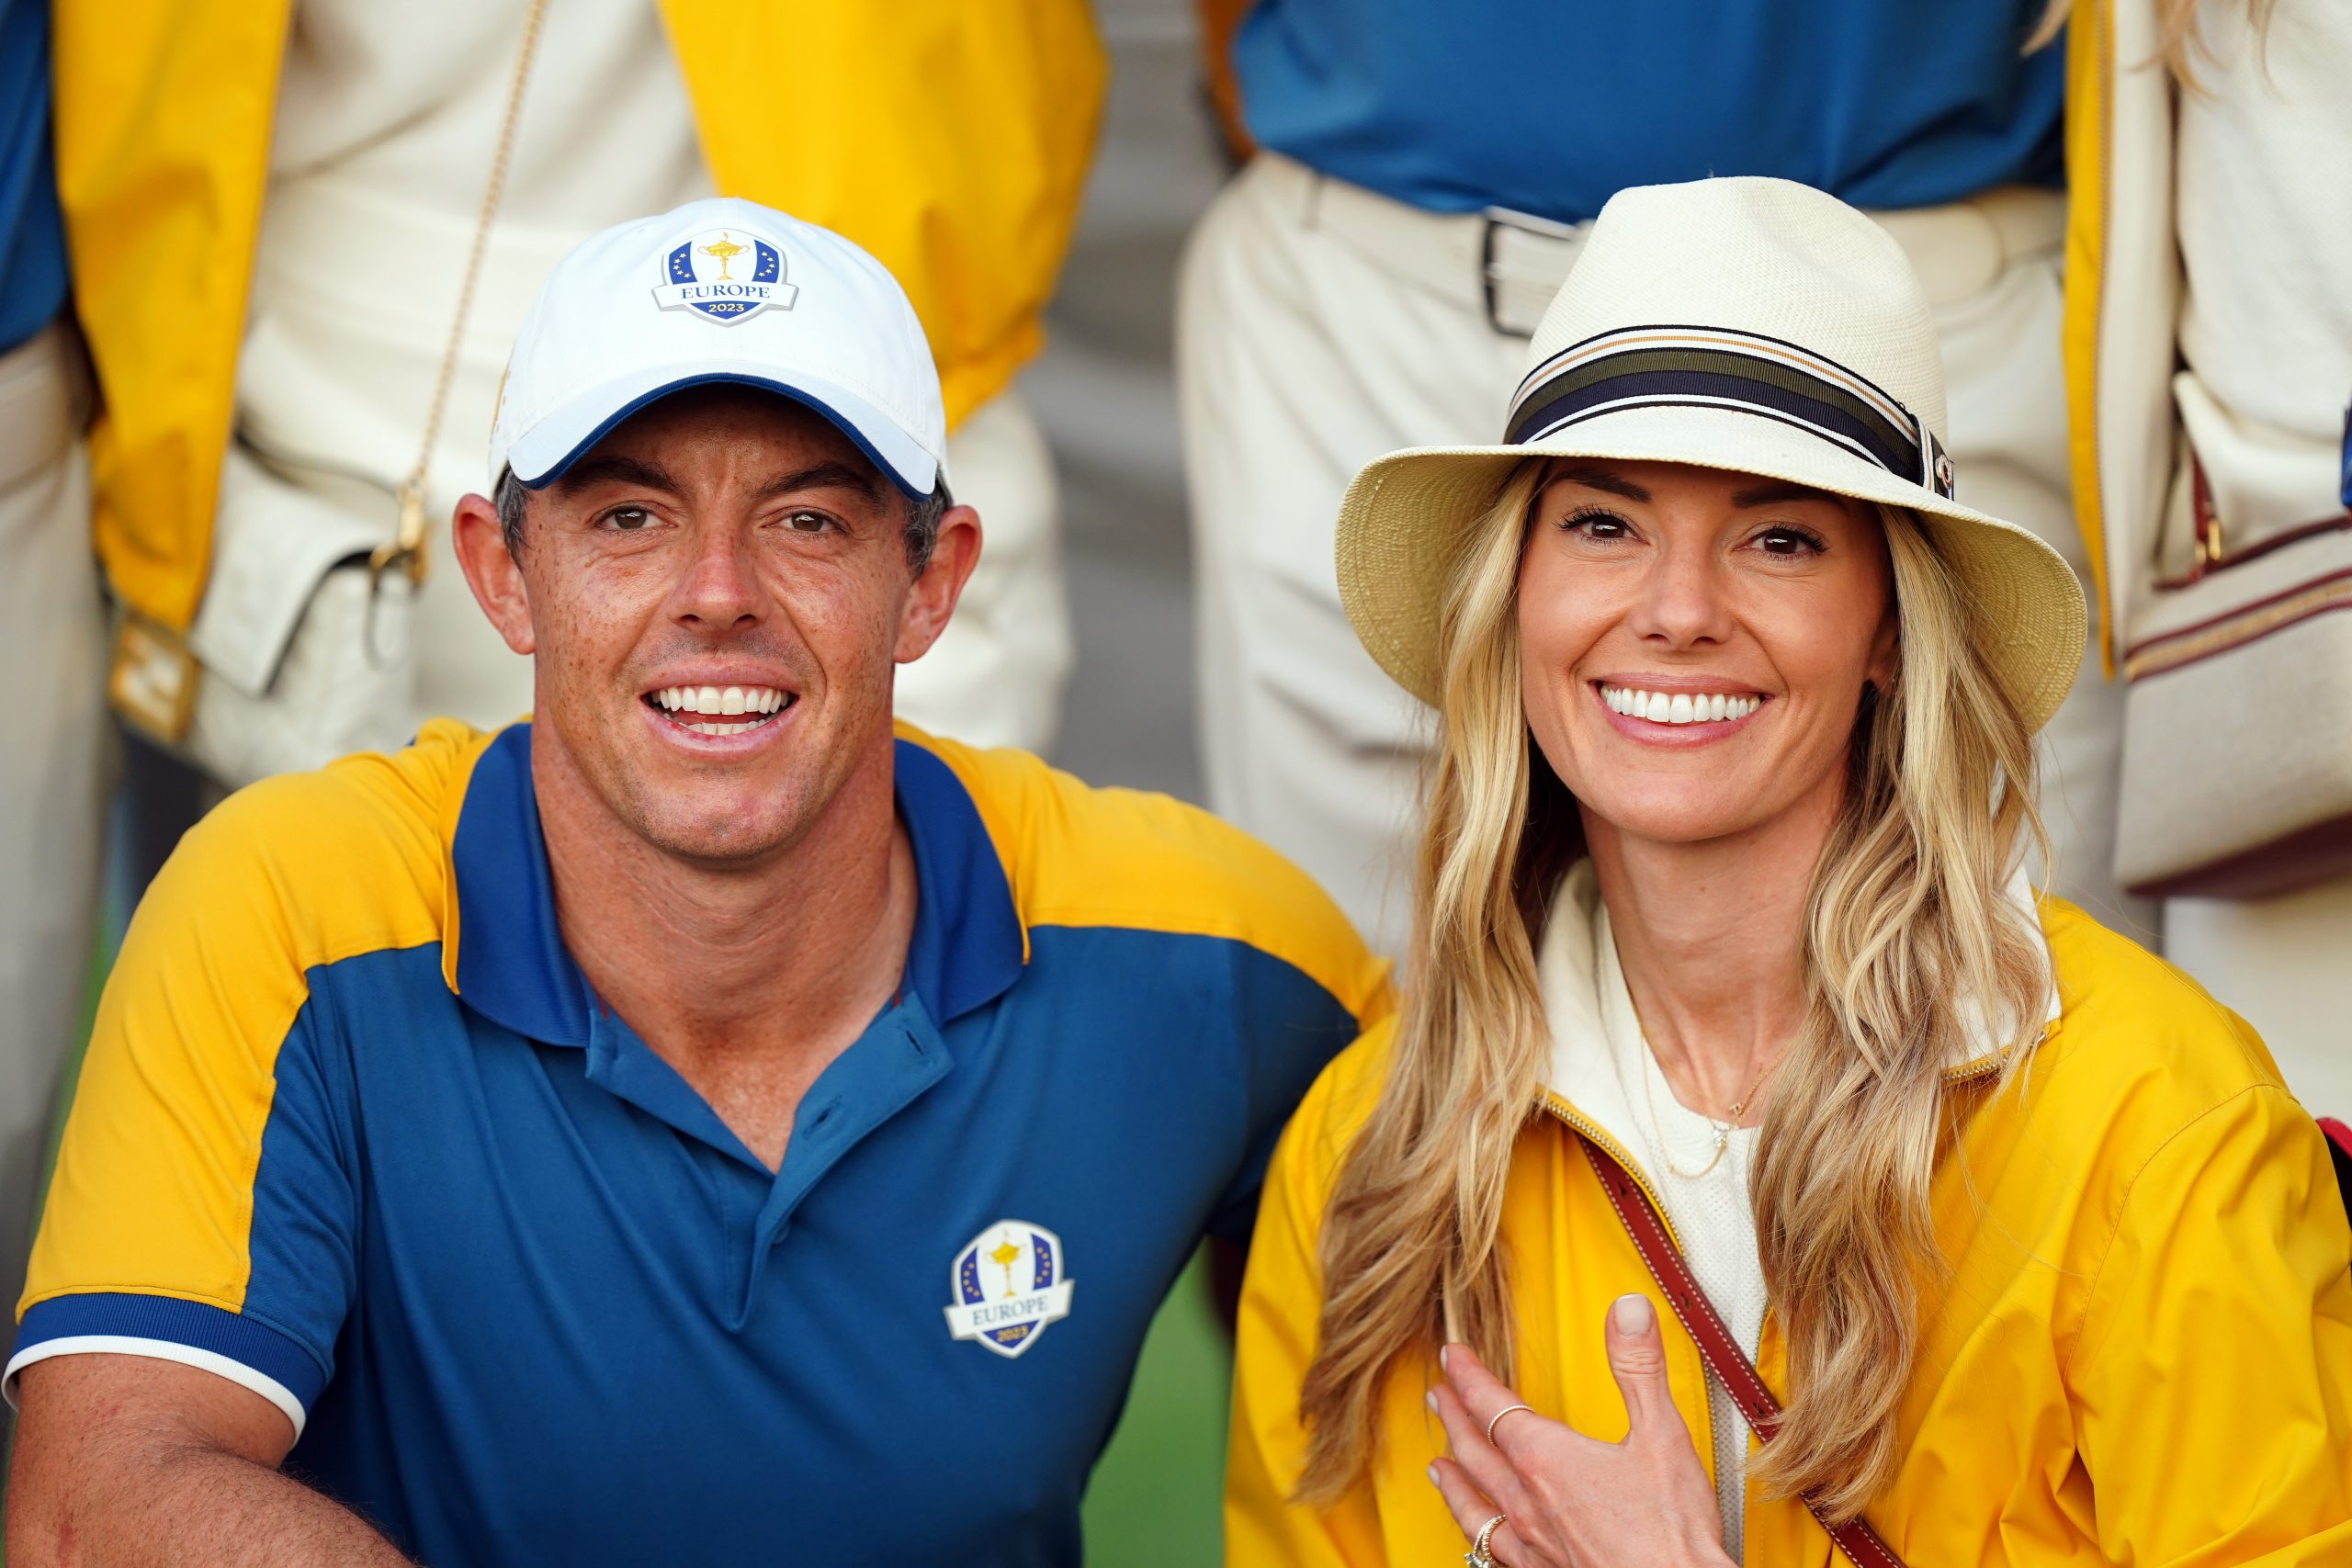 How Rory McIlroy and Erica Stoll reunited over ‘secret meetings at m Florida home over a MONTH’ before divorce U-turn